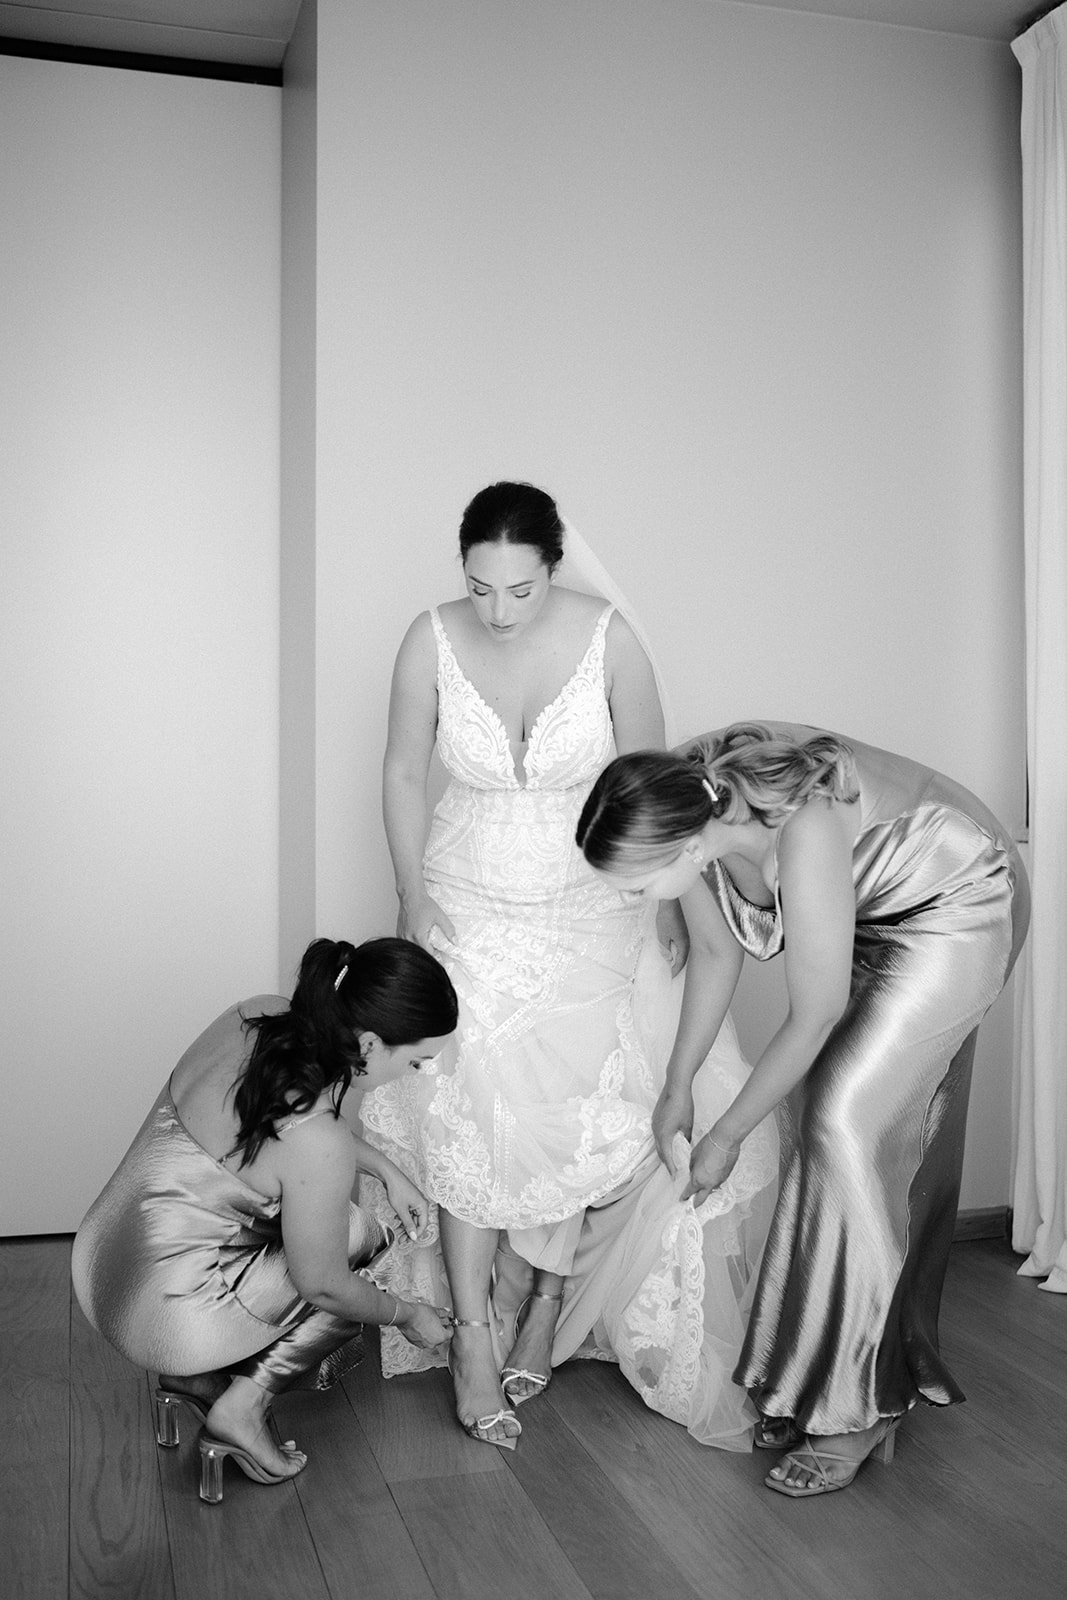 The bridesmaids help the bride fasten her shoes